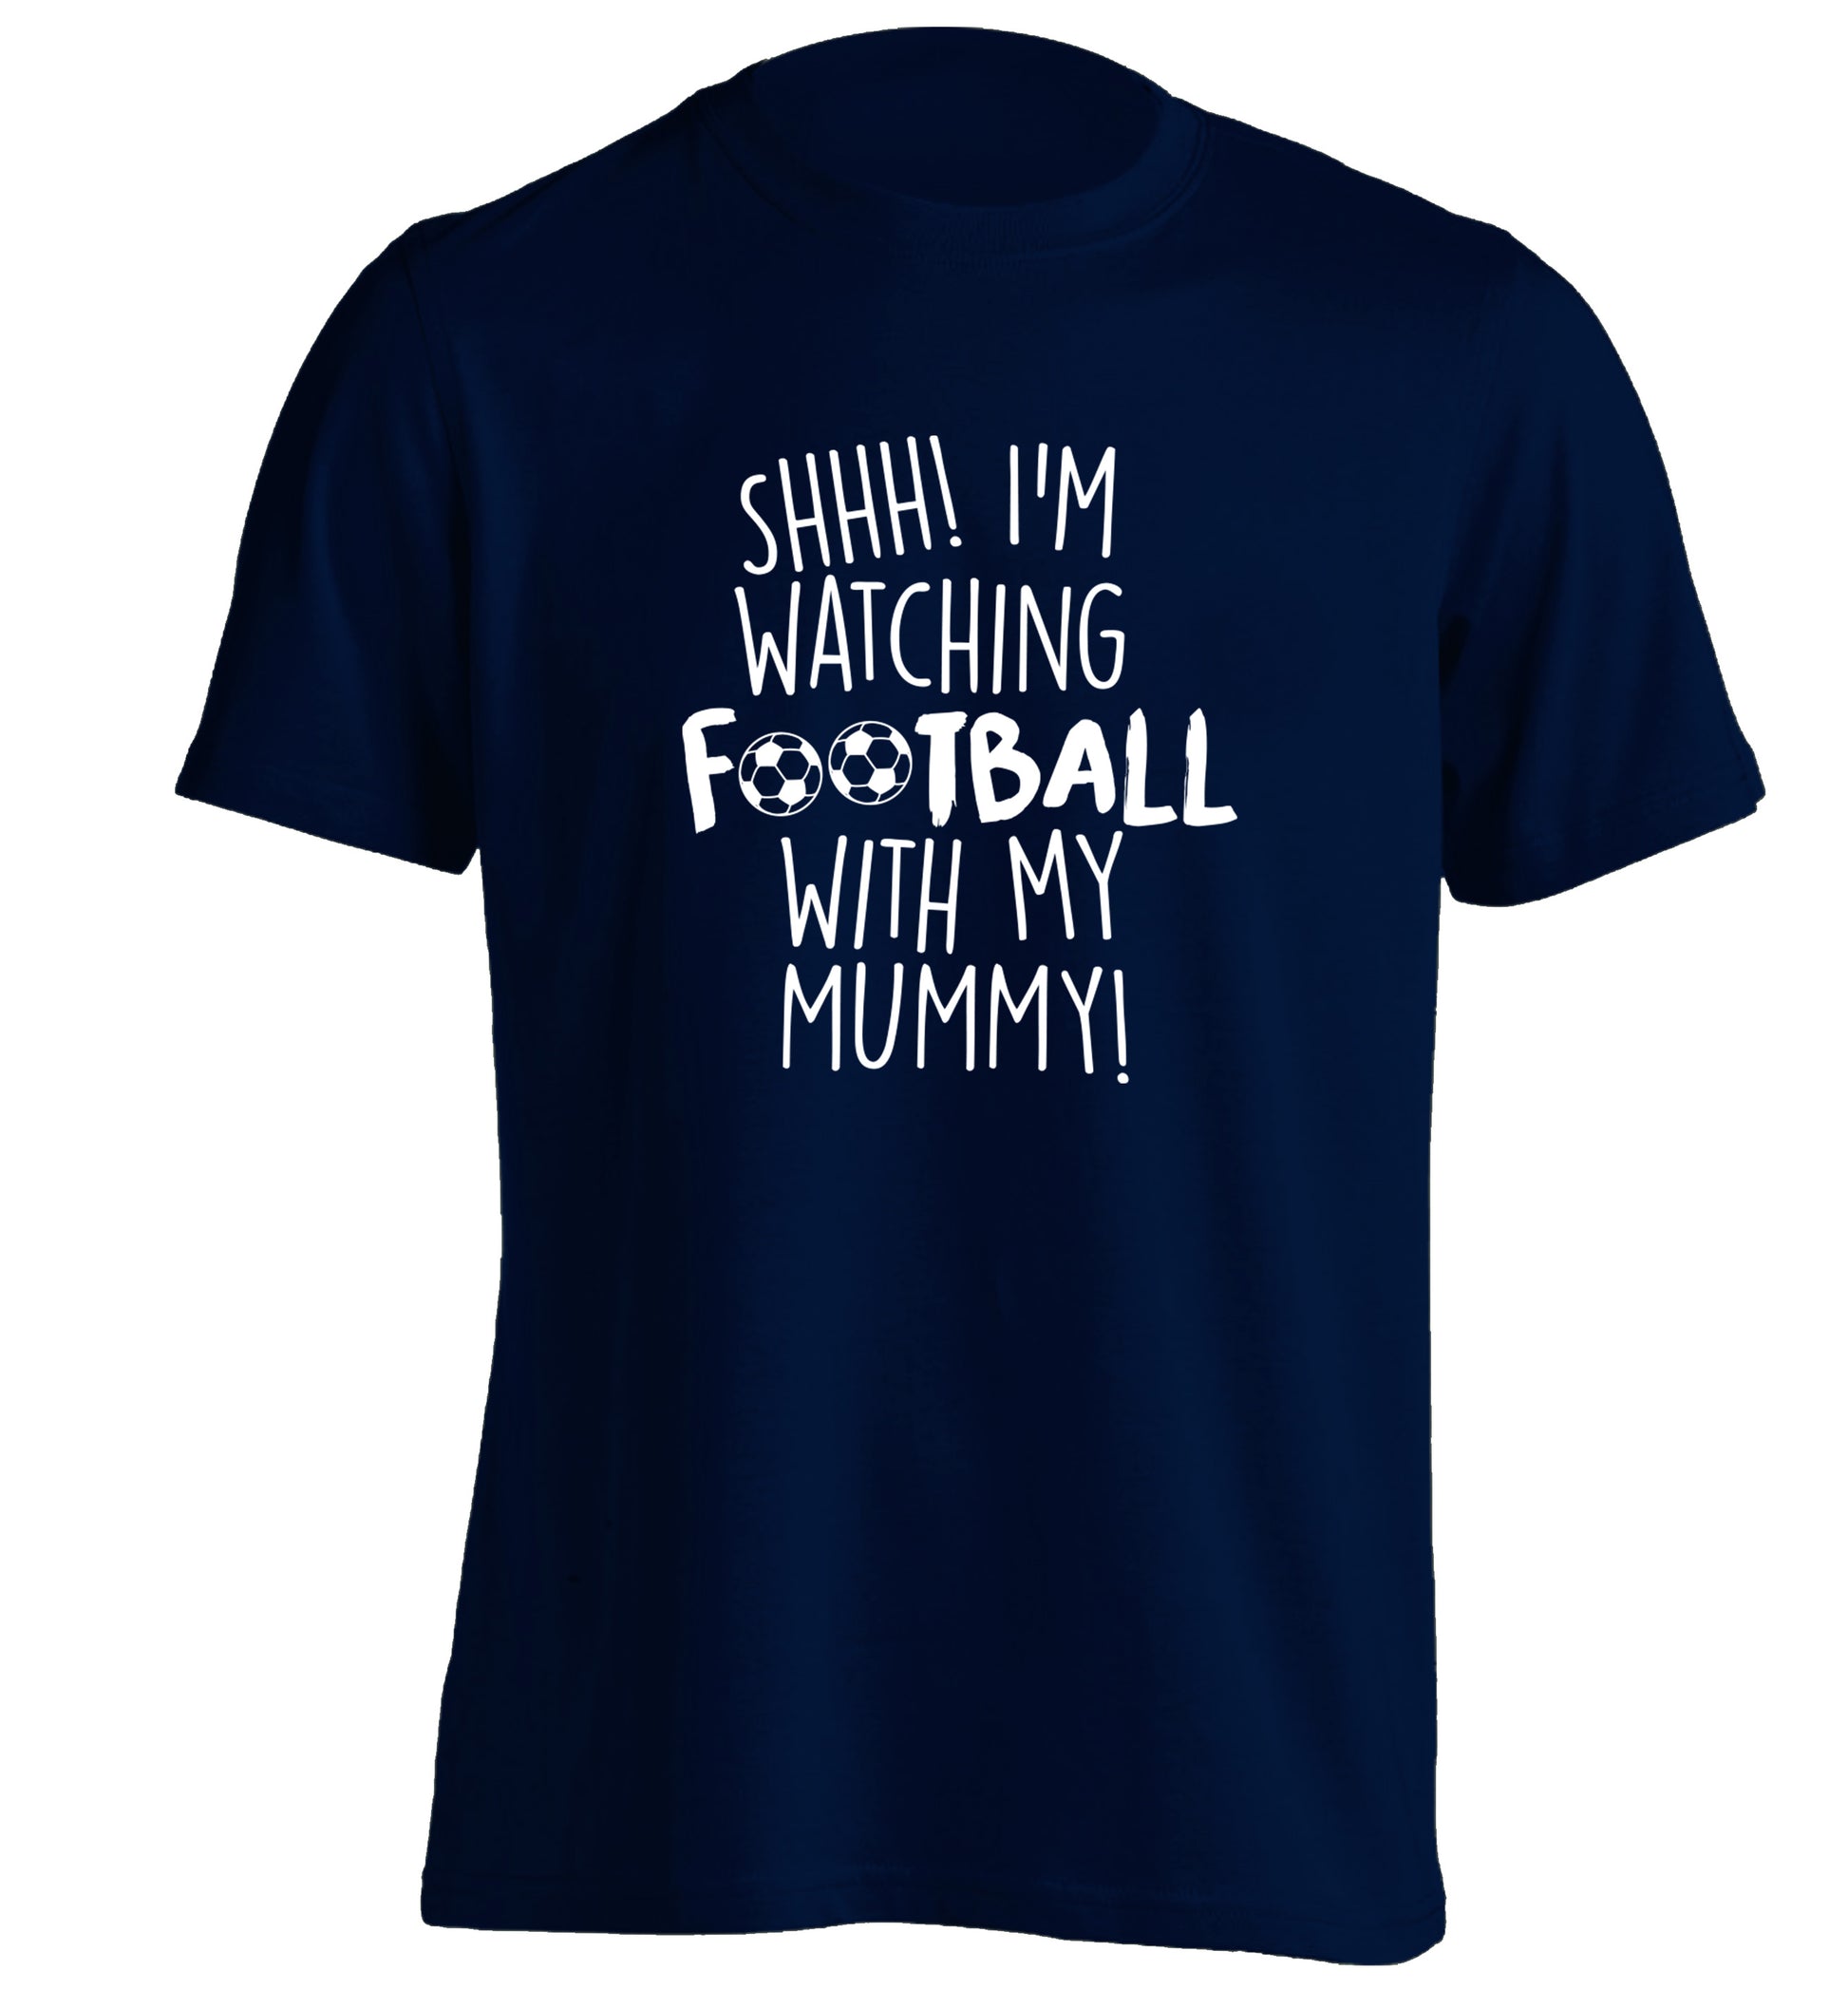 Shhh I'm watching football with my mummy adults unisexnavy Tshirt 2XL